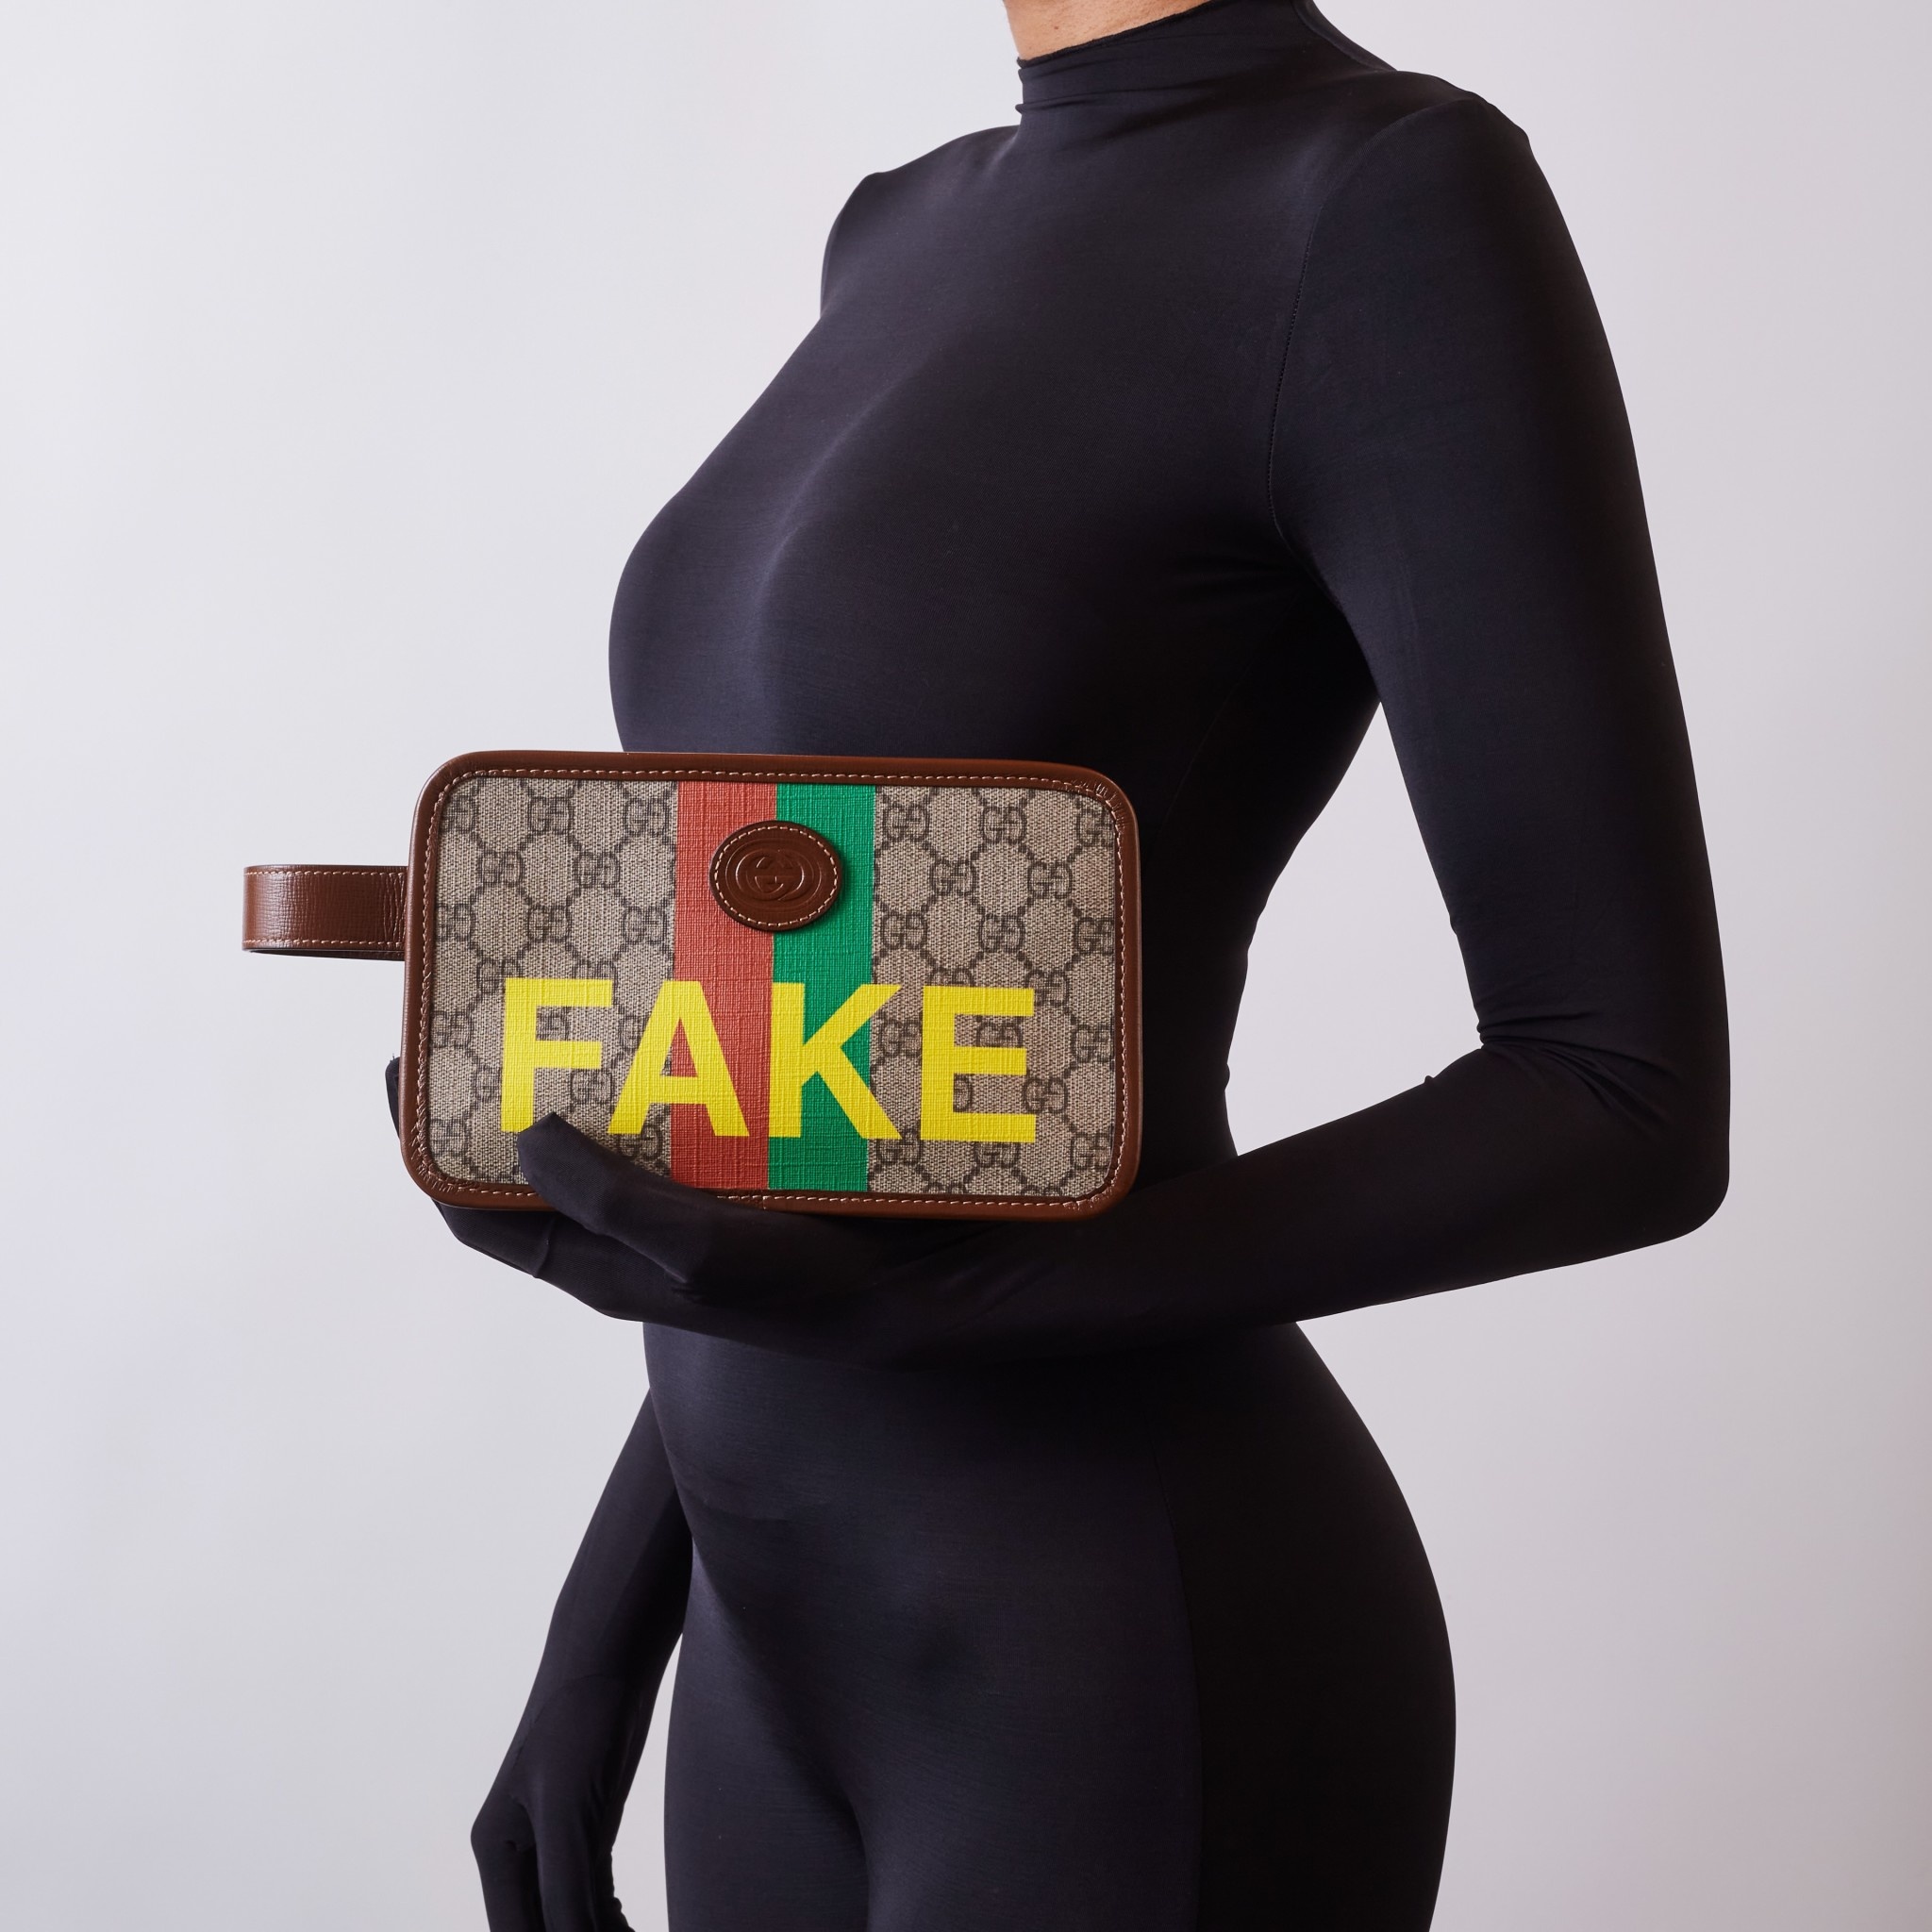 What Rich People Don't Want You to Know About Fake Bags! - YouTube